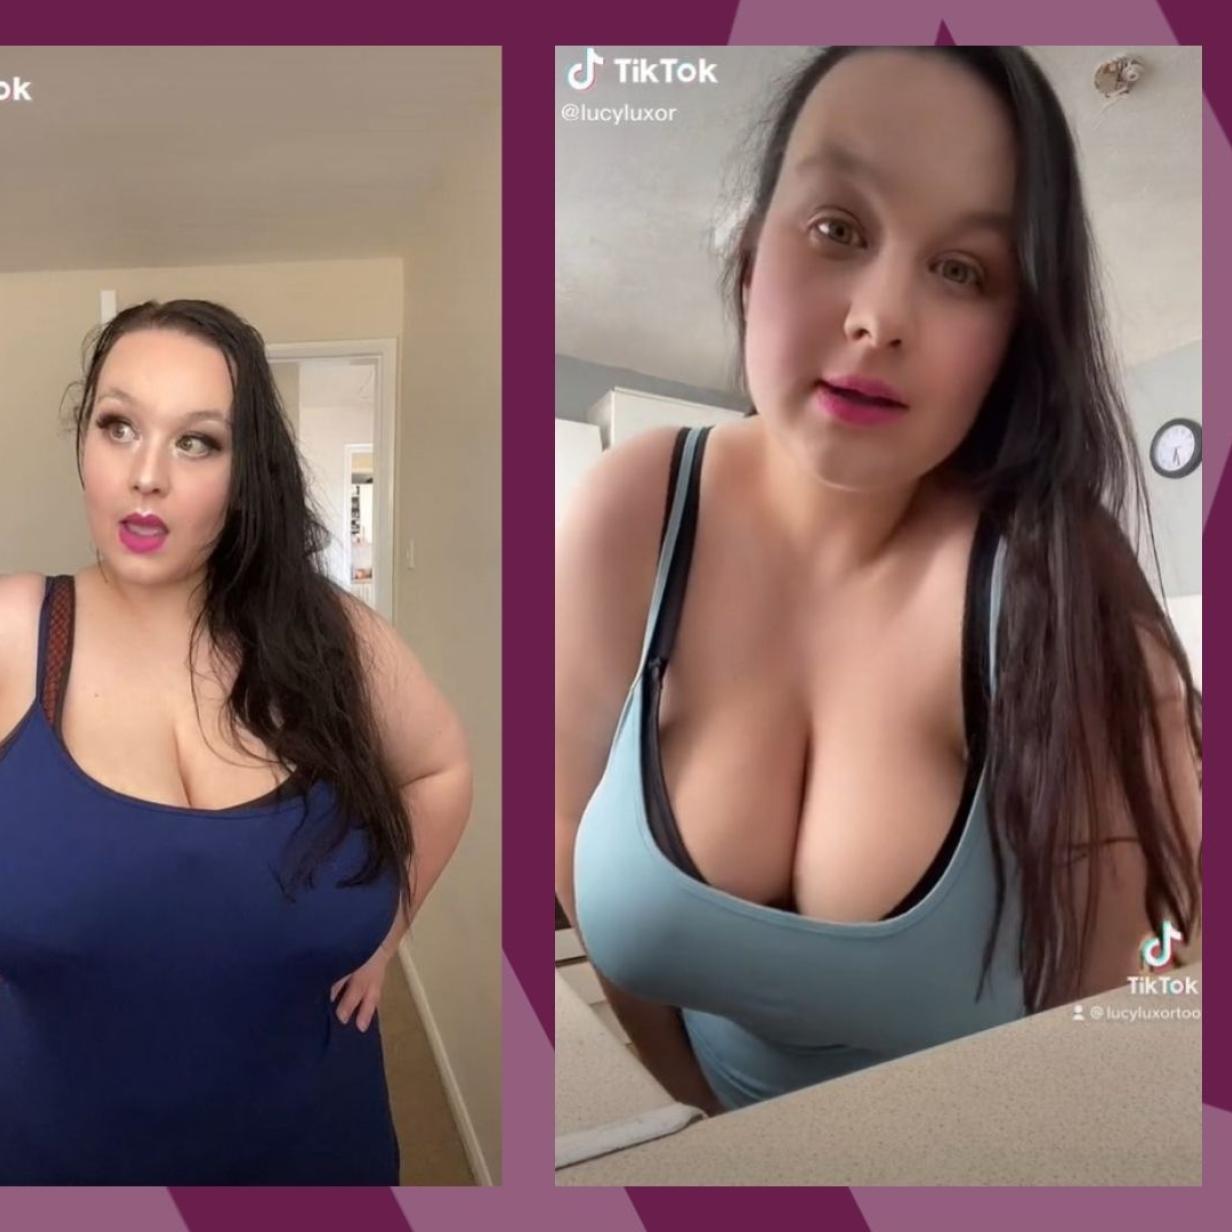 Woman with 38L breasts felt 'like a freak' before becoming TikTok star